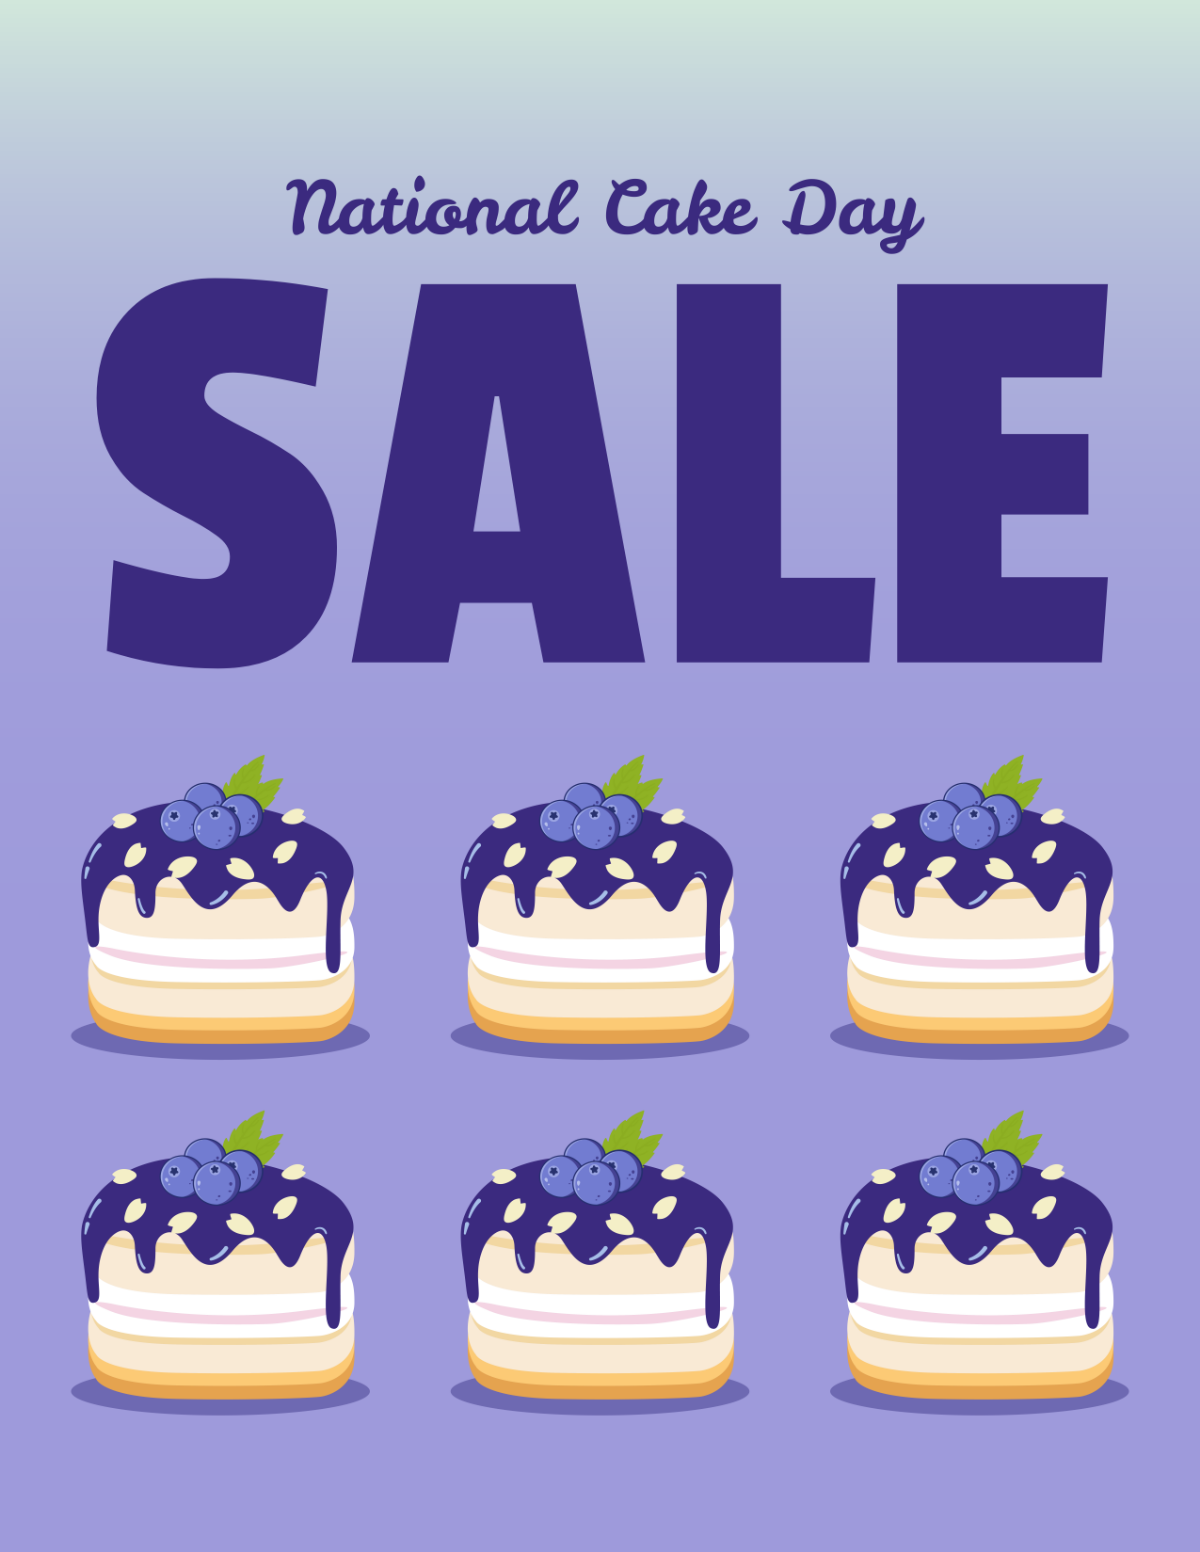 National Cake Day Sales Flyer Template